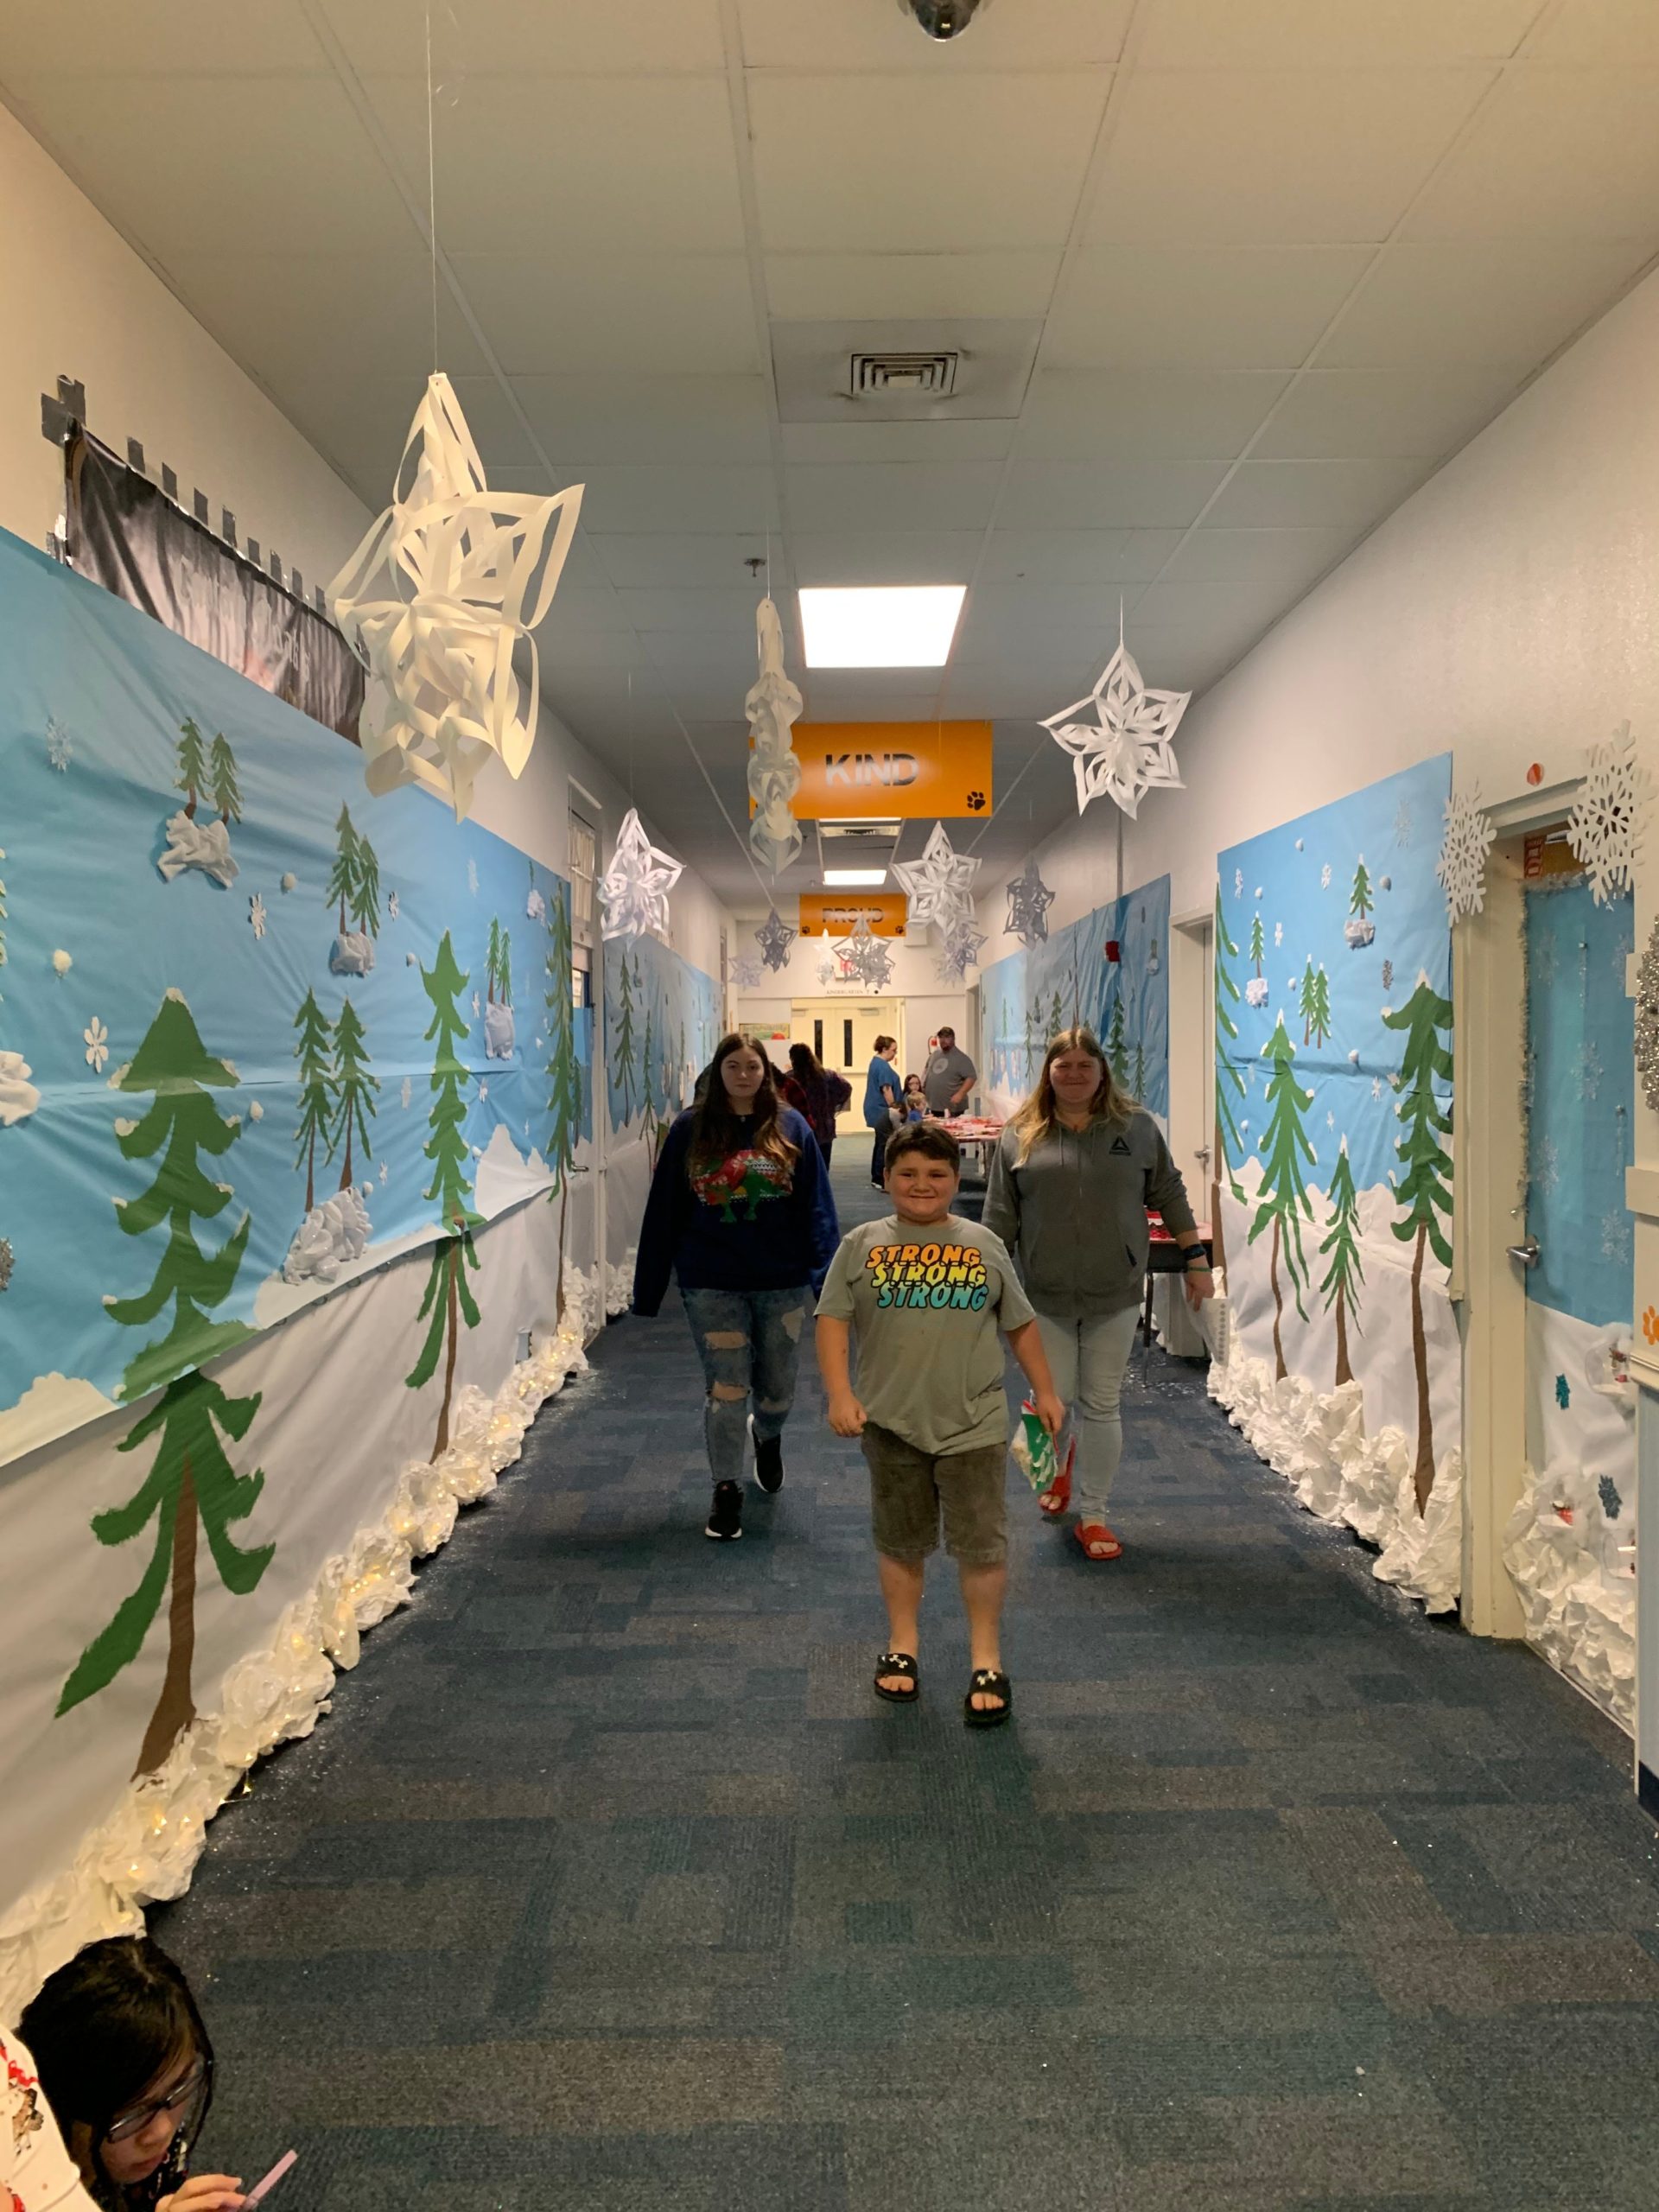 Bagdad Elementary School held a family literacy night Dec. 14. More than 400 parents and students turned out for this event that incorporated literacy and math activities for parents and students.